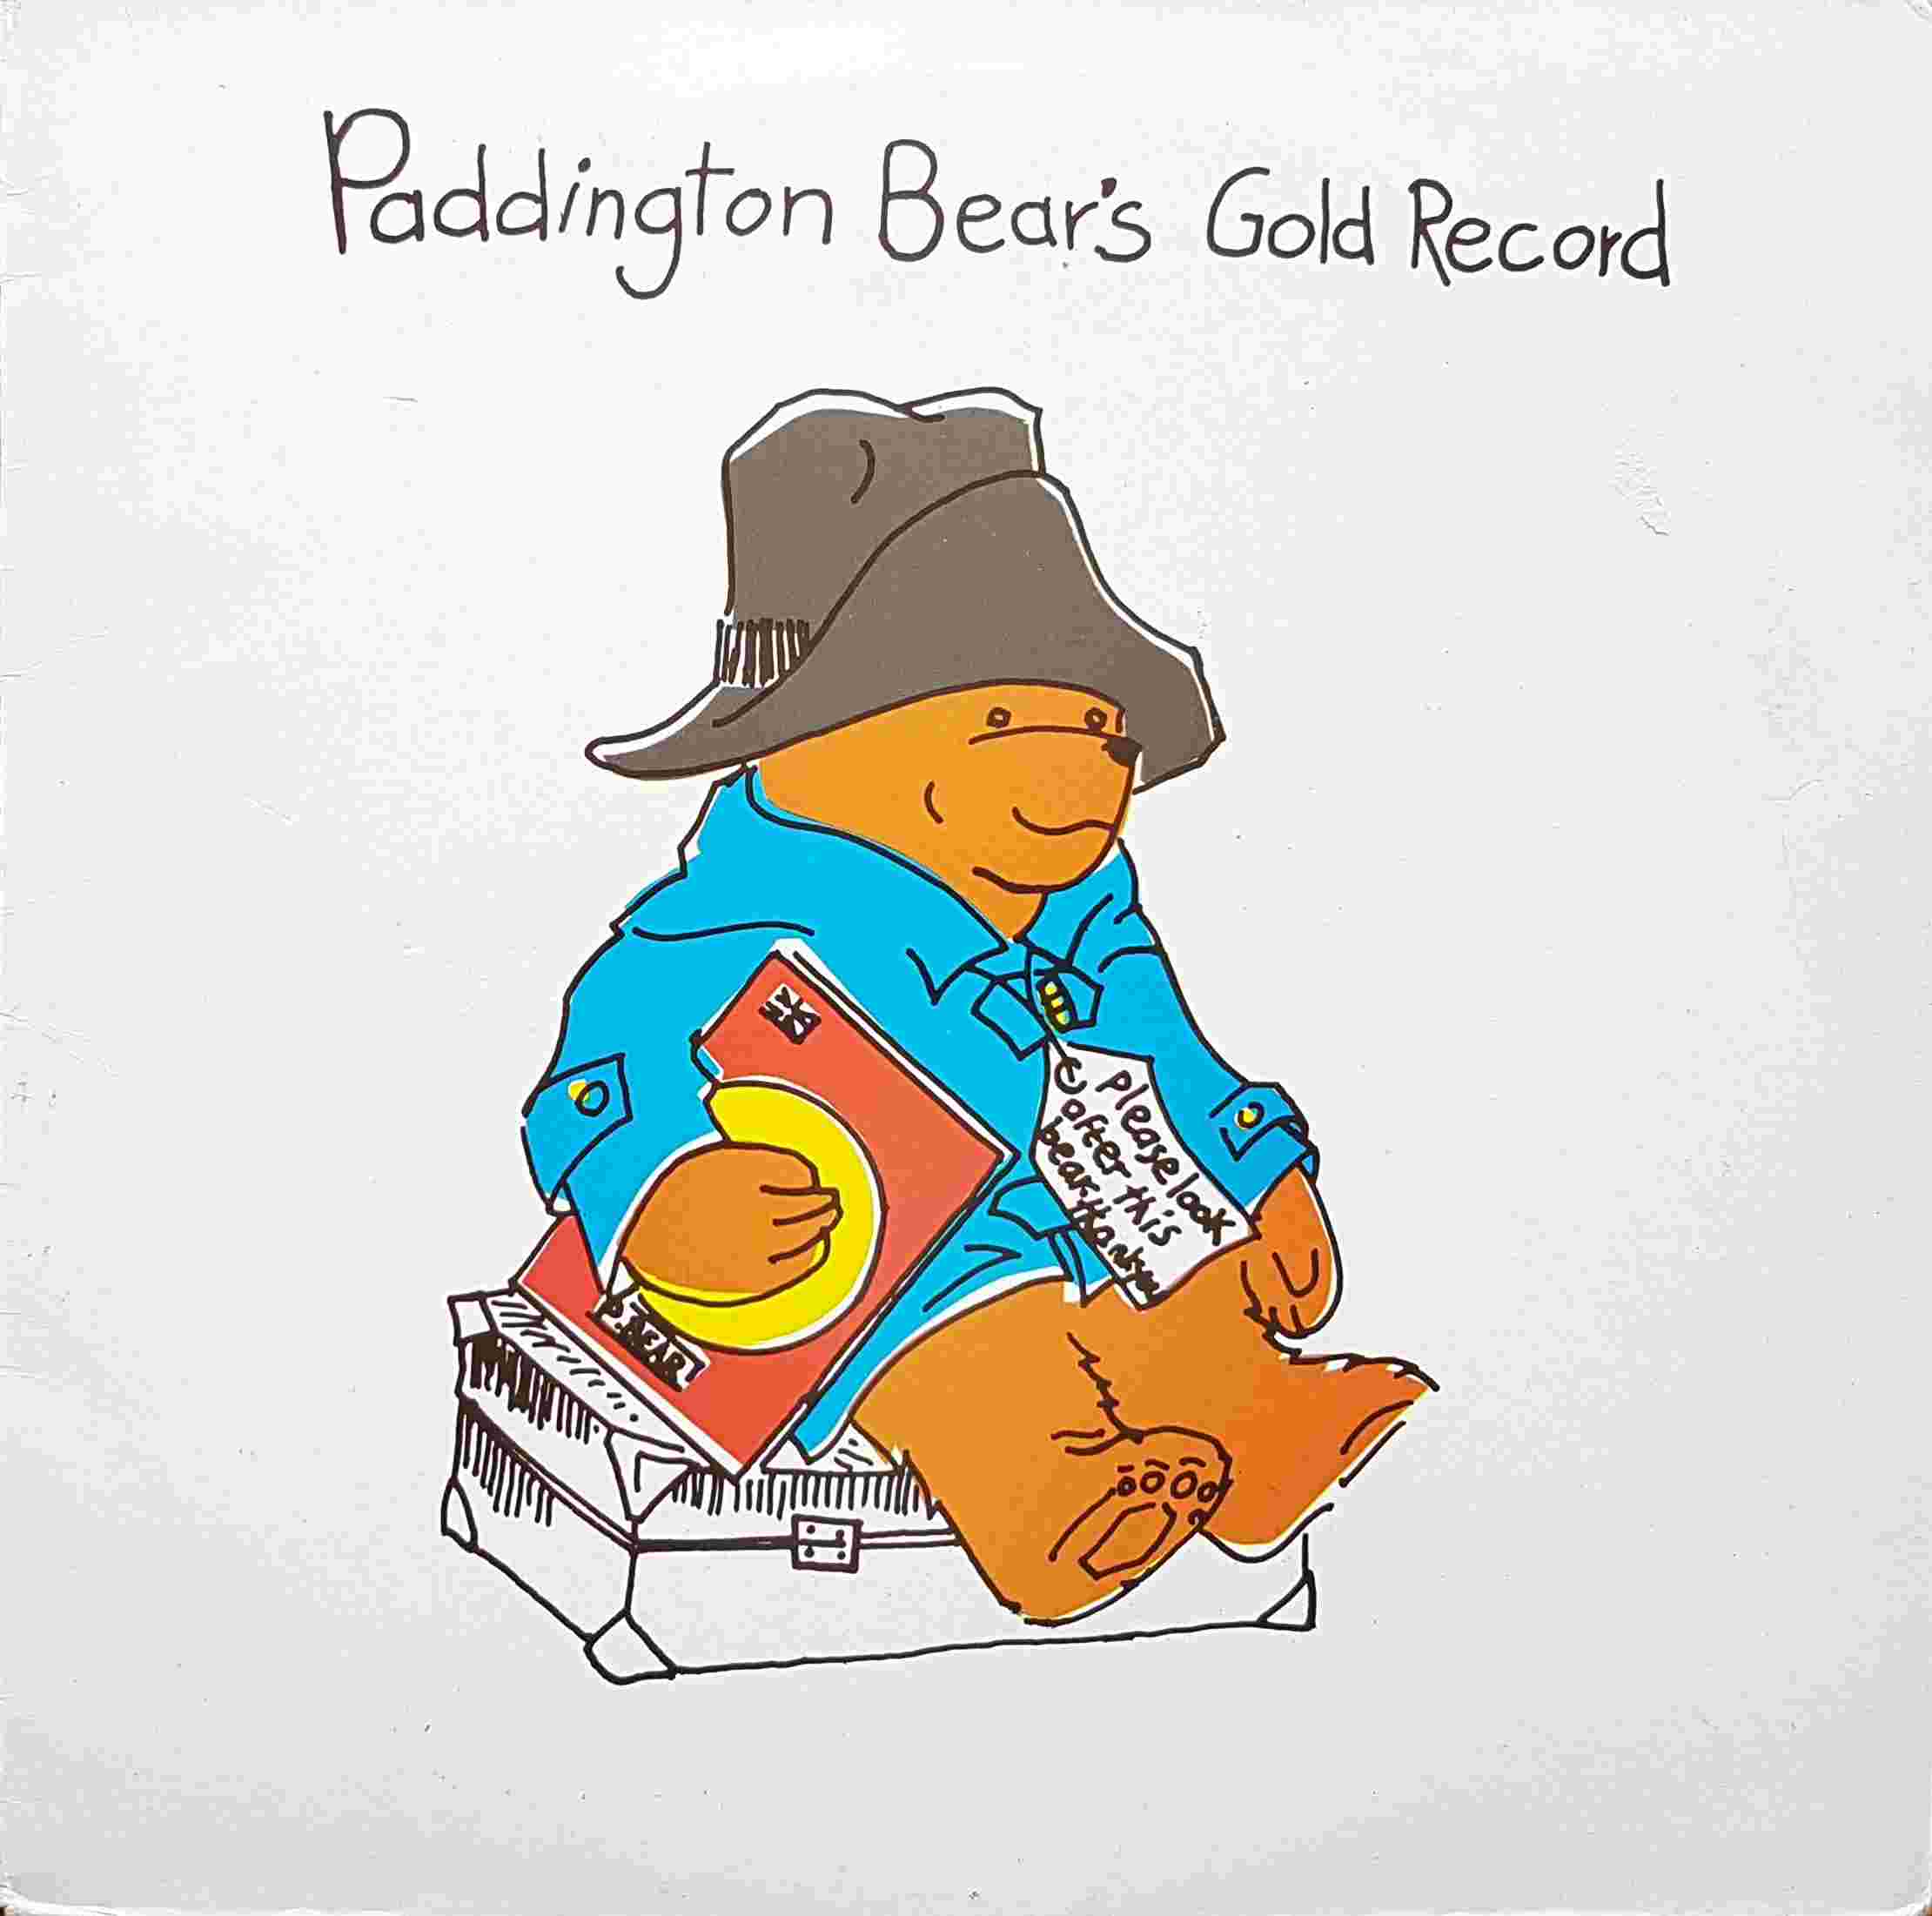 Picture of Paddington Bear's gold record by artist Various from ITV, Channel 4 and Channel 5 albums library